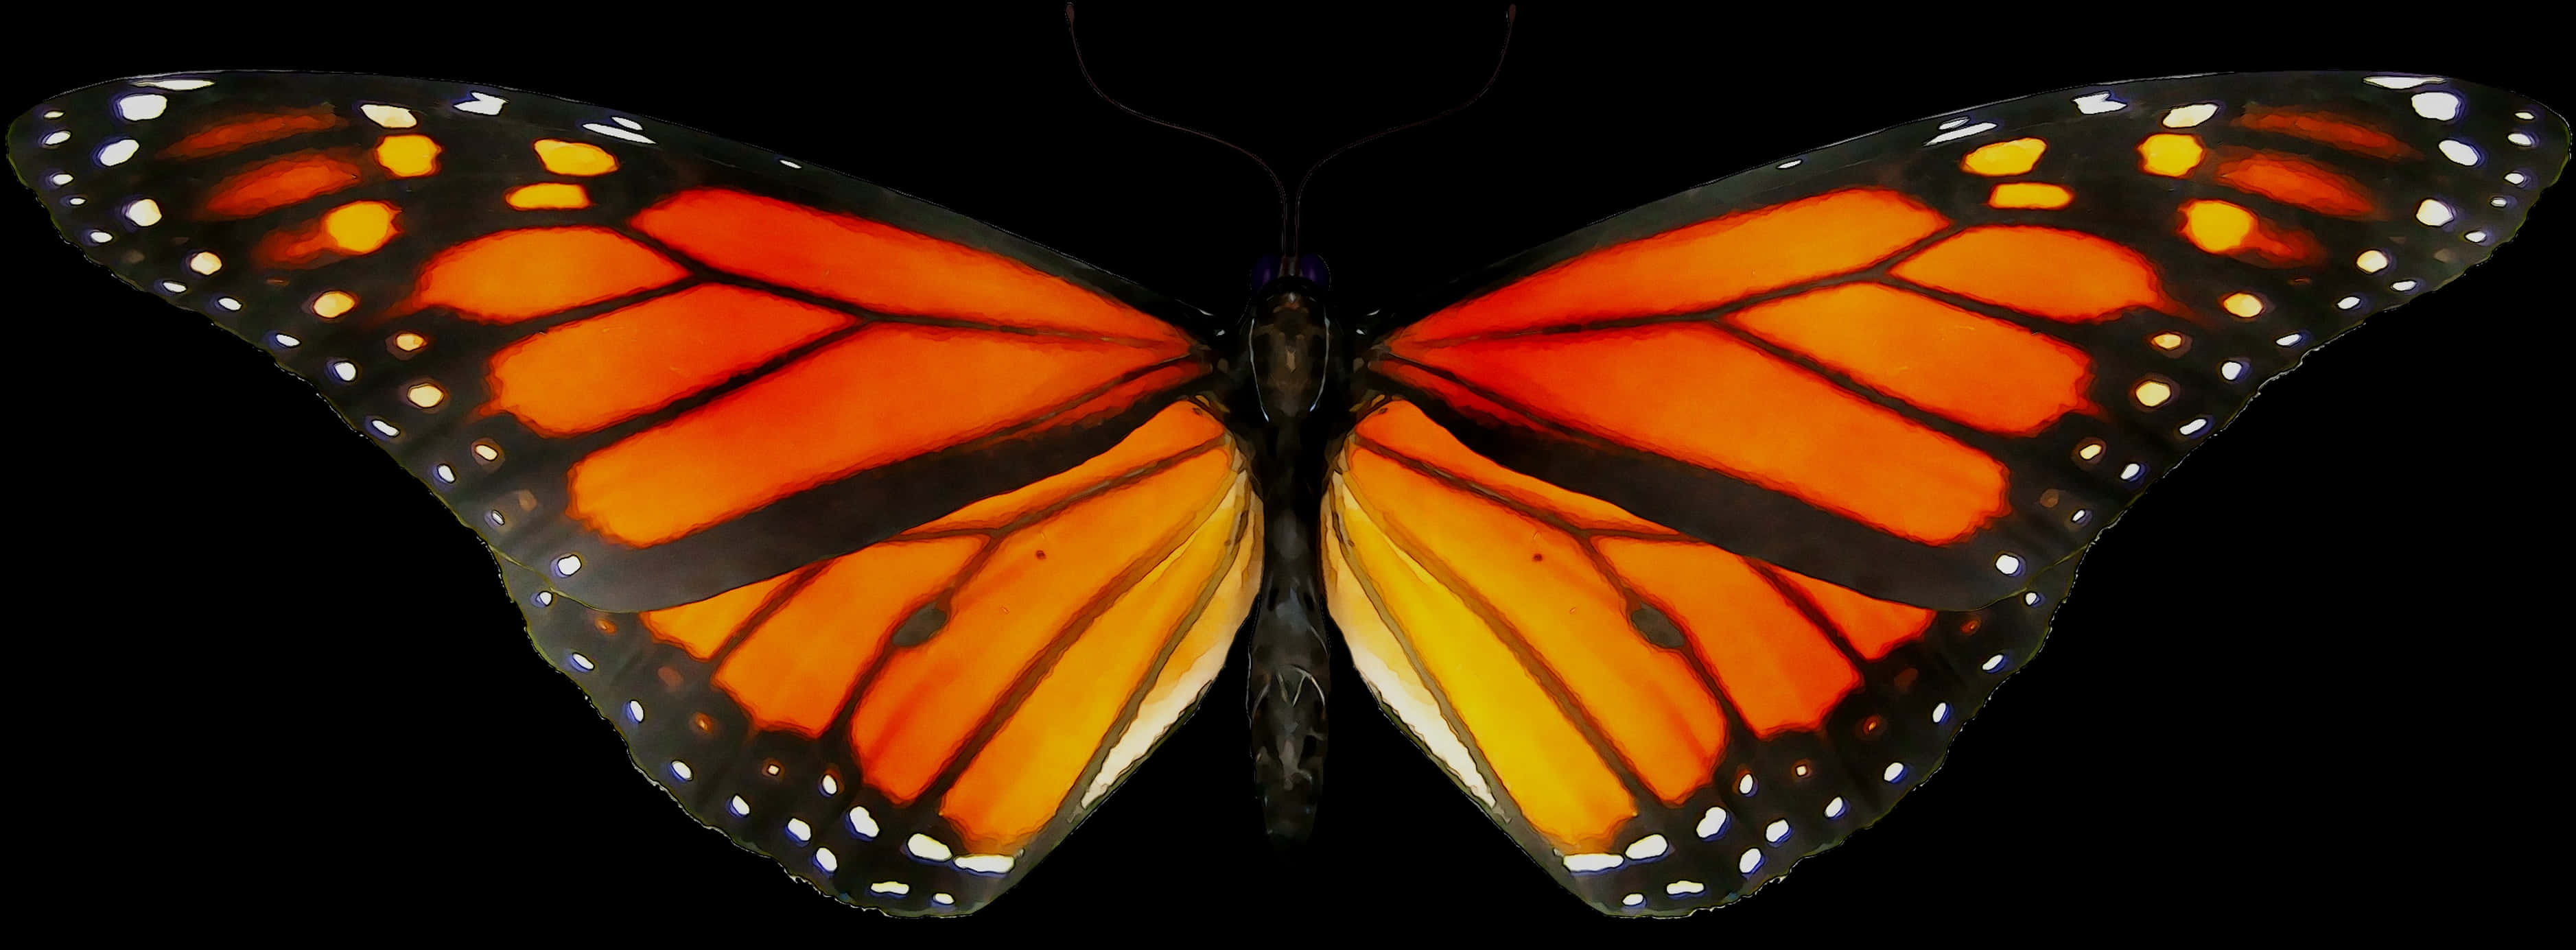 A Close Up Of A Butterfly